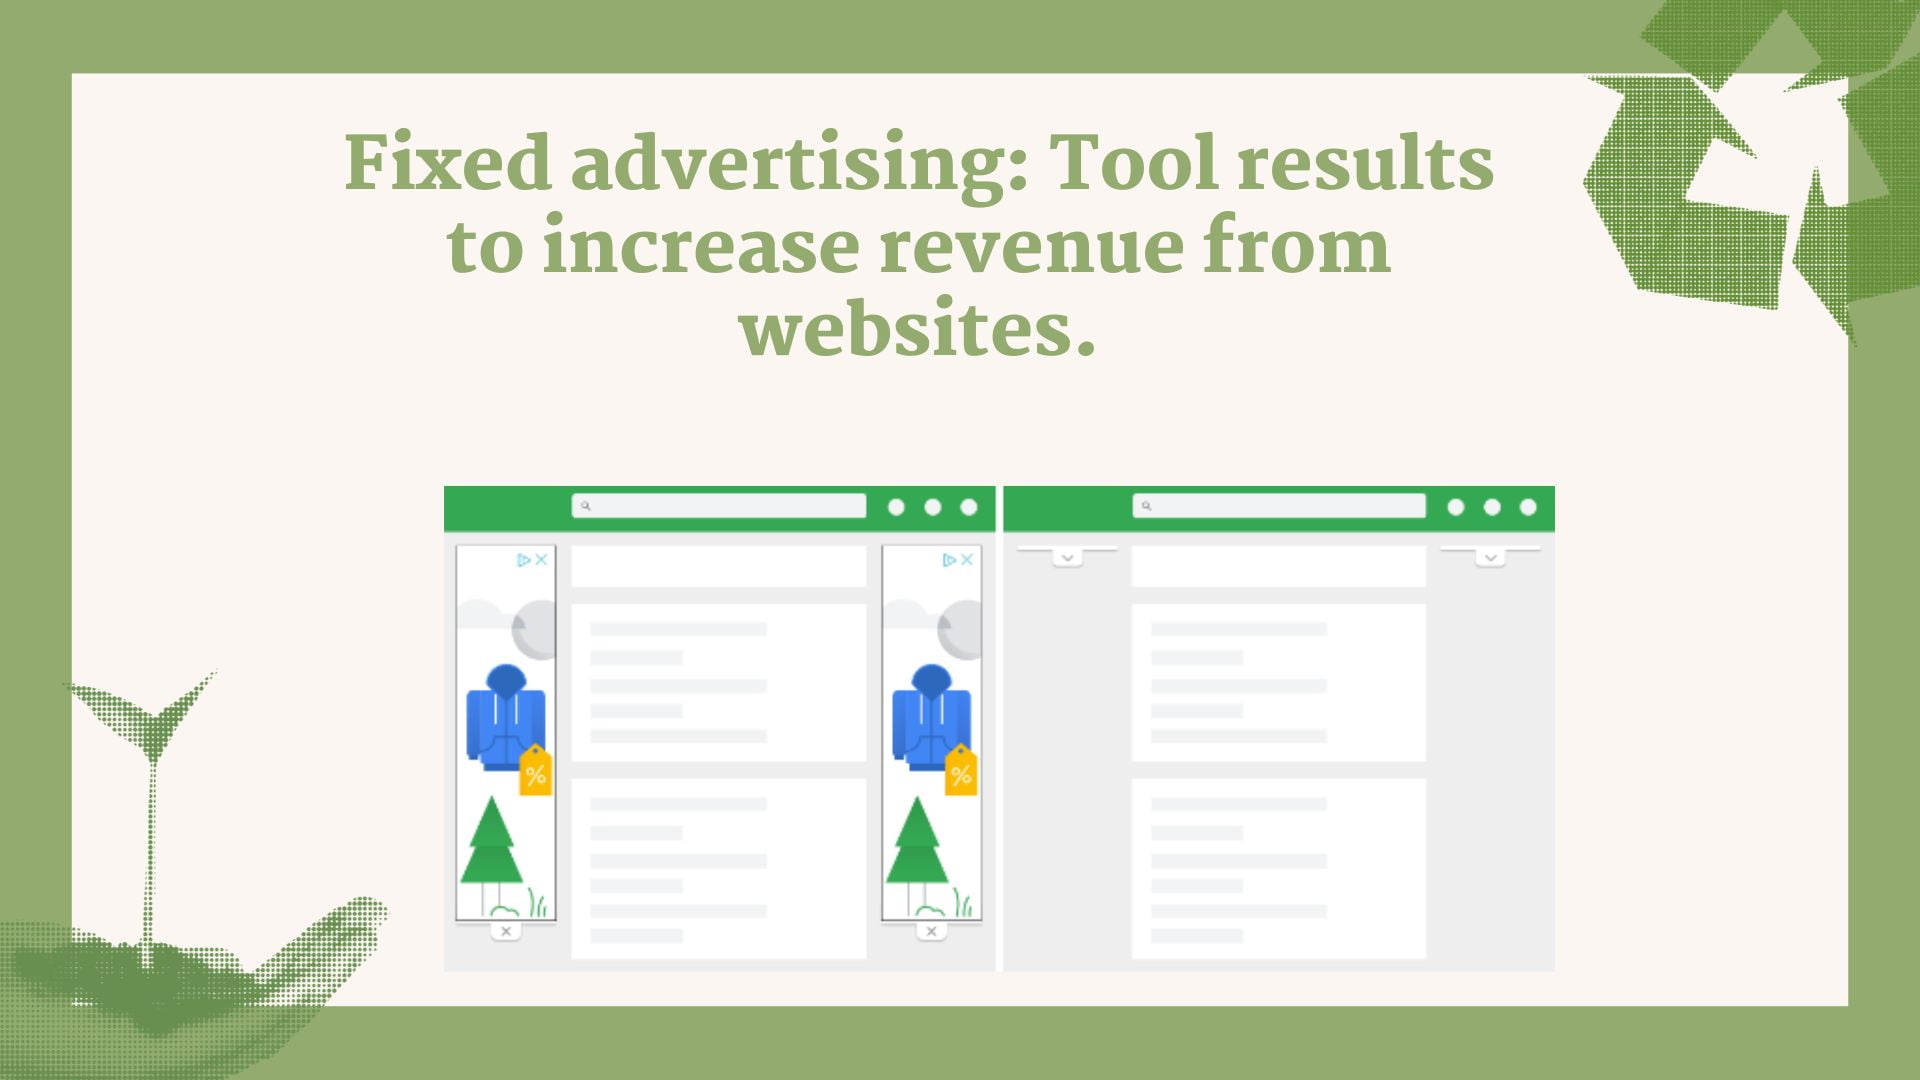 Fixed advertising: Tool results to increase revenue from websites.